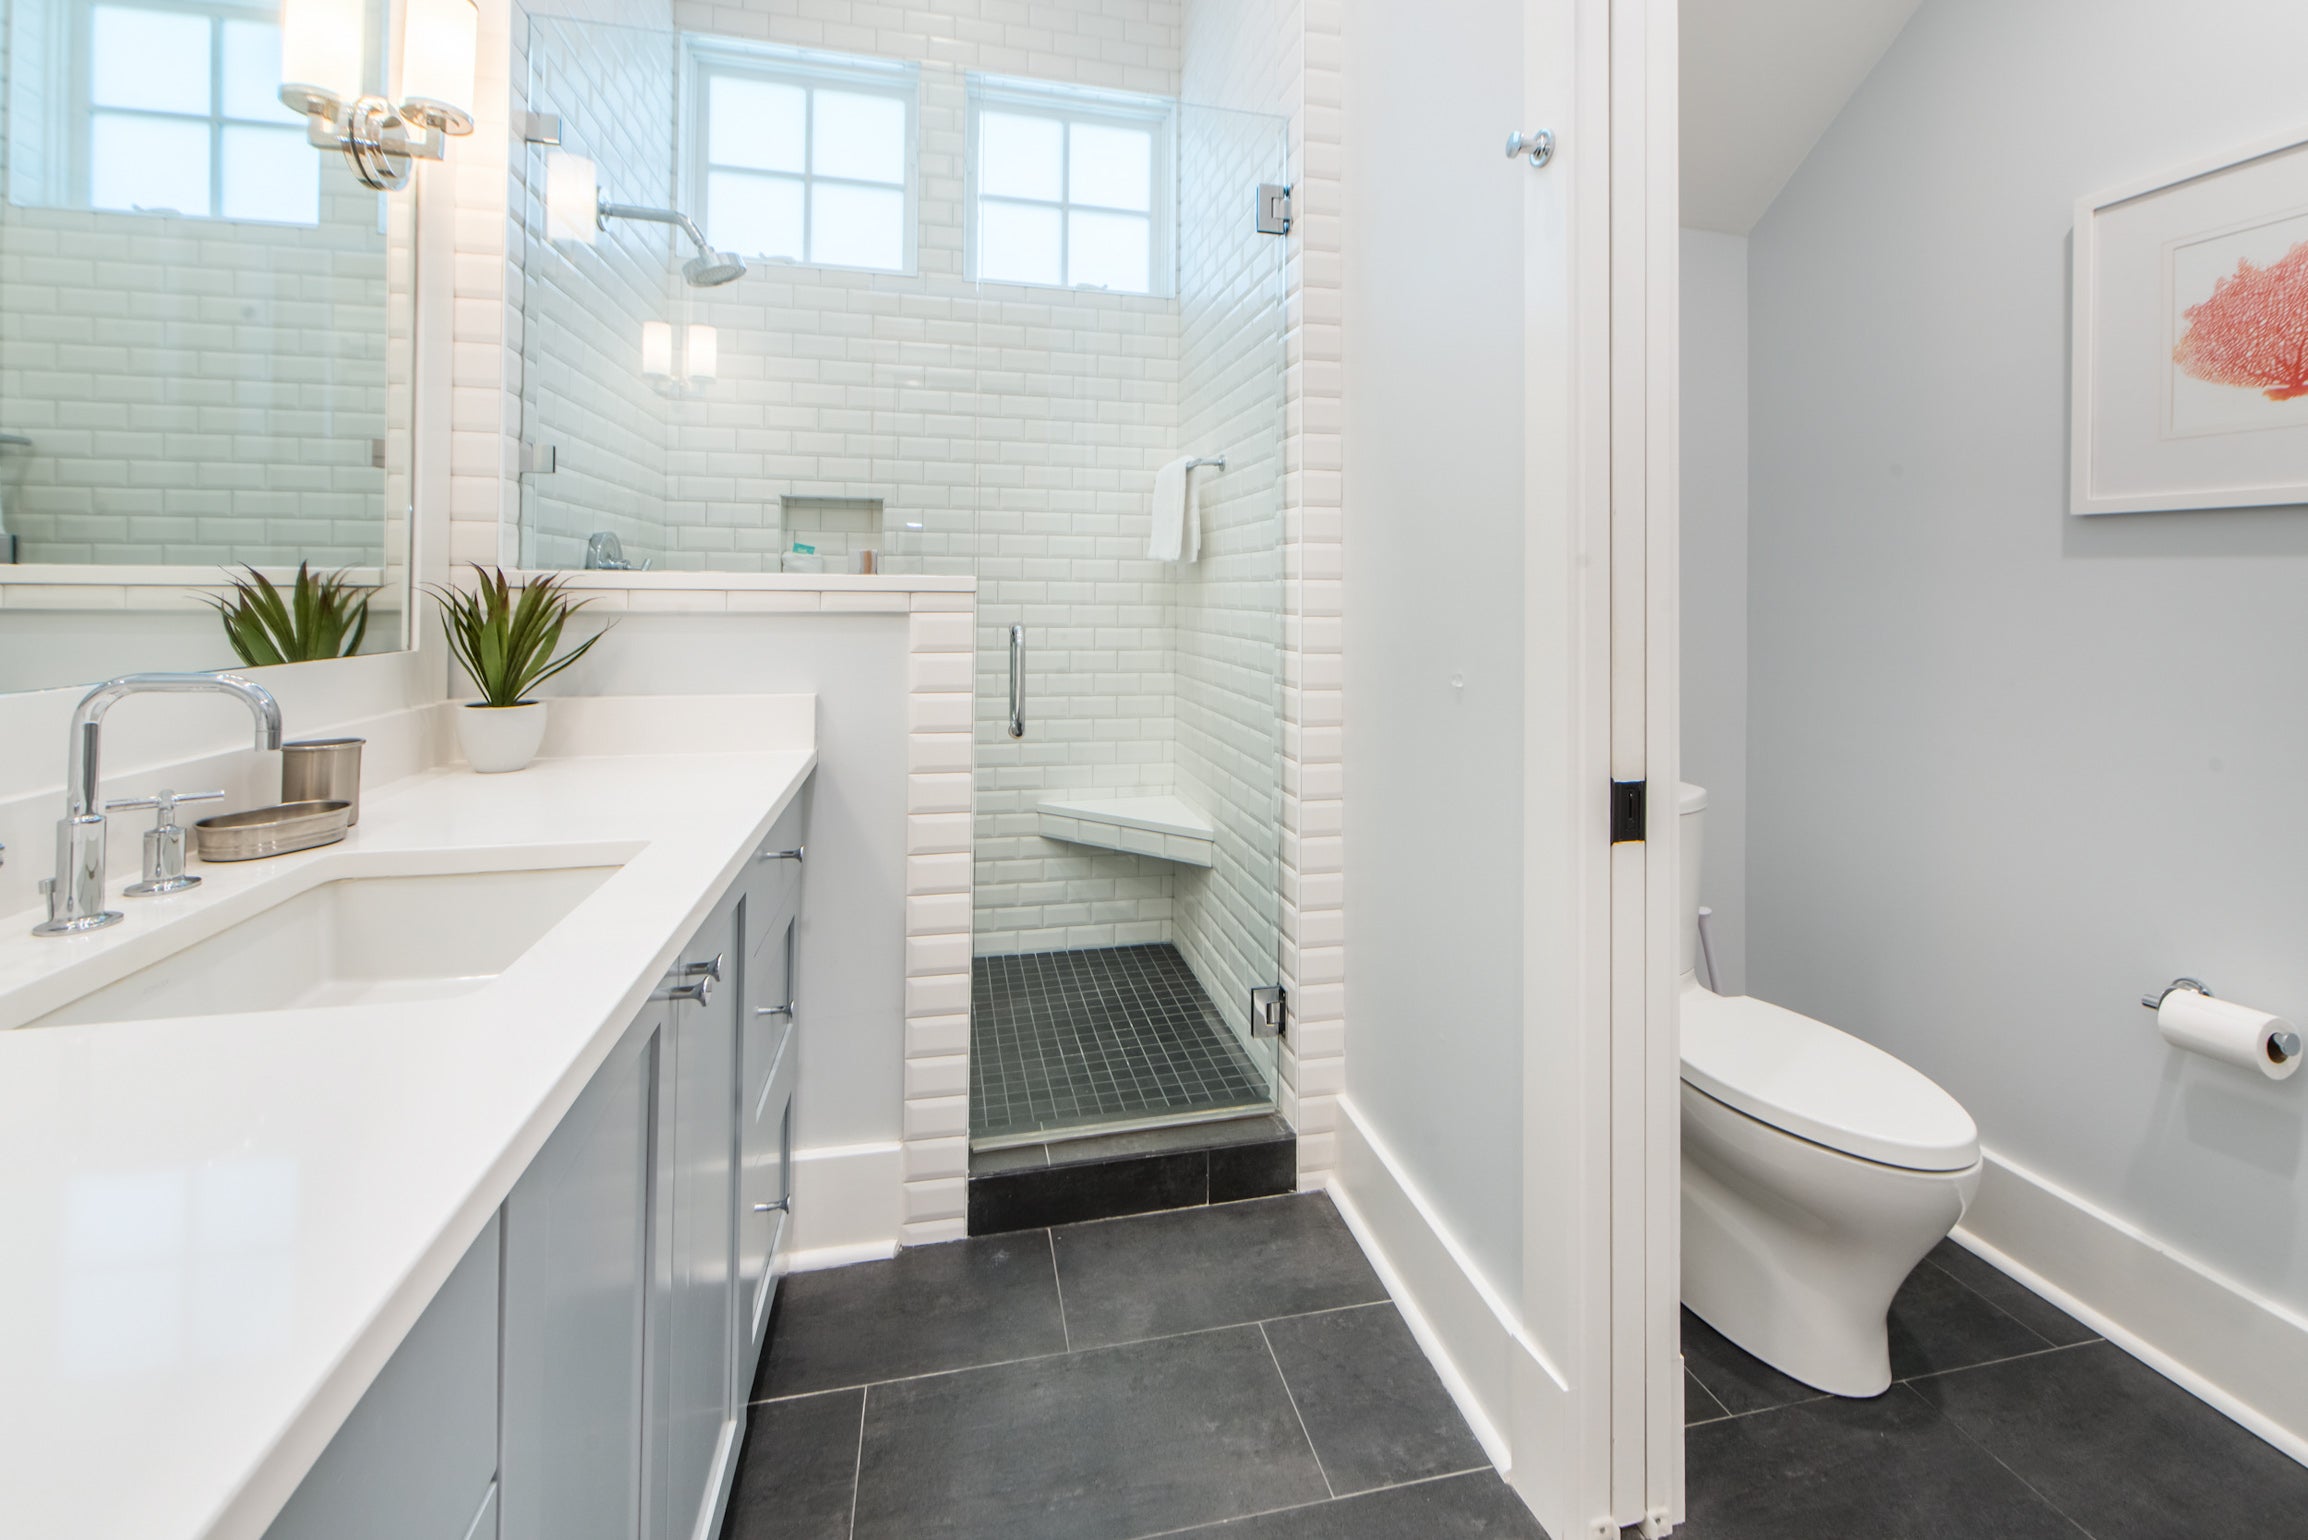 Beautifully styled guest bath with walk-in shower